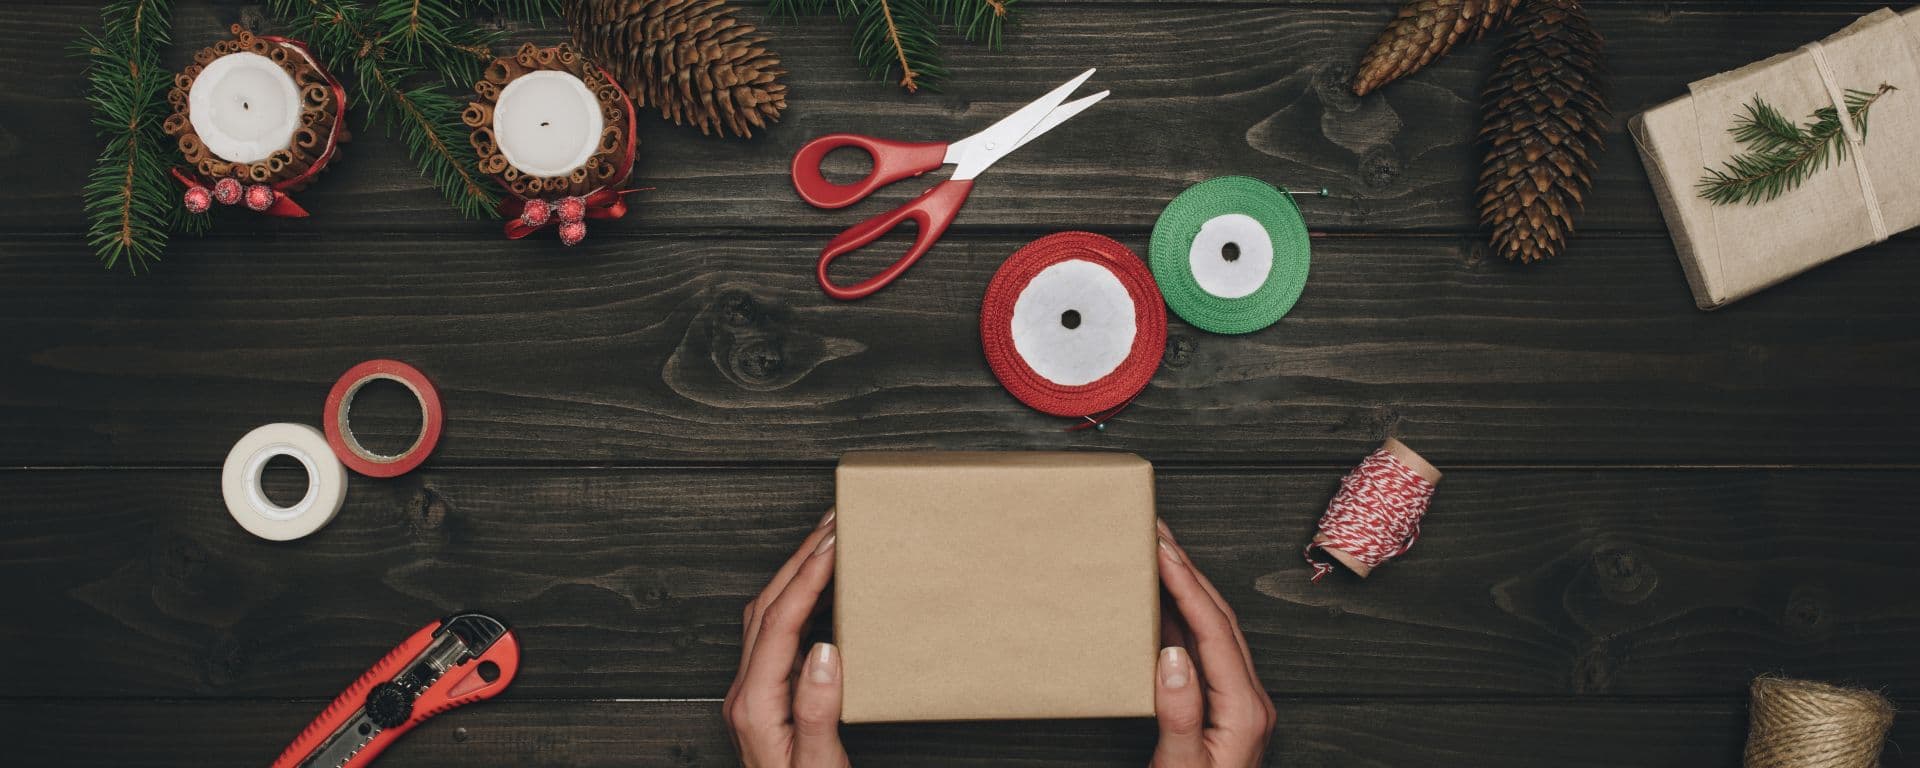 6 Homemade Christmas Gift Ideas To Spoil Your Loved Ones With